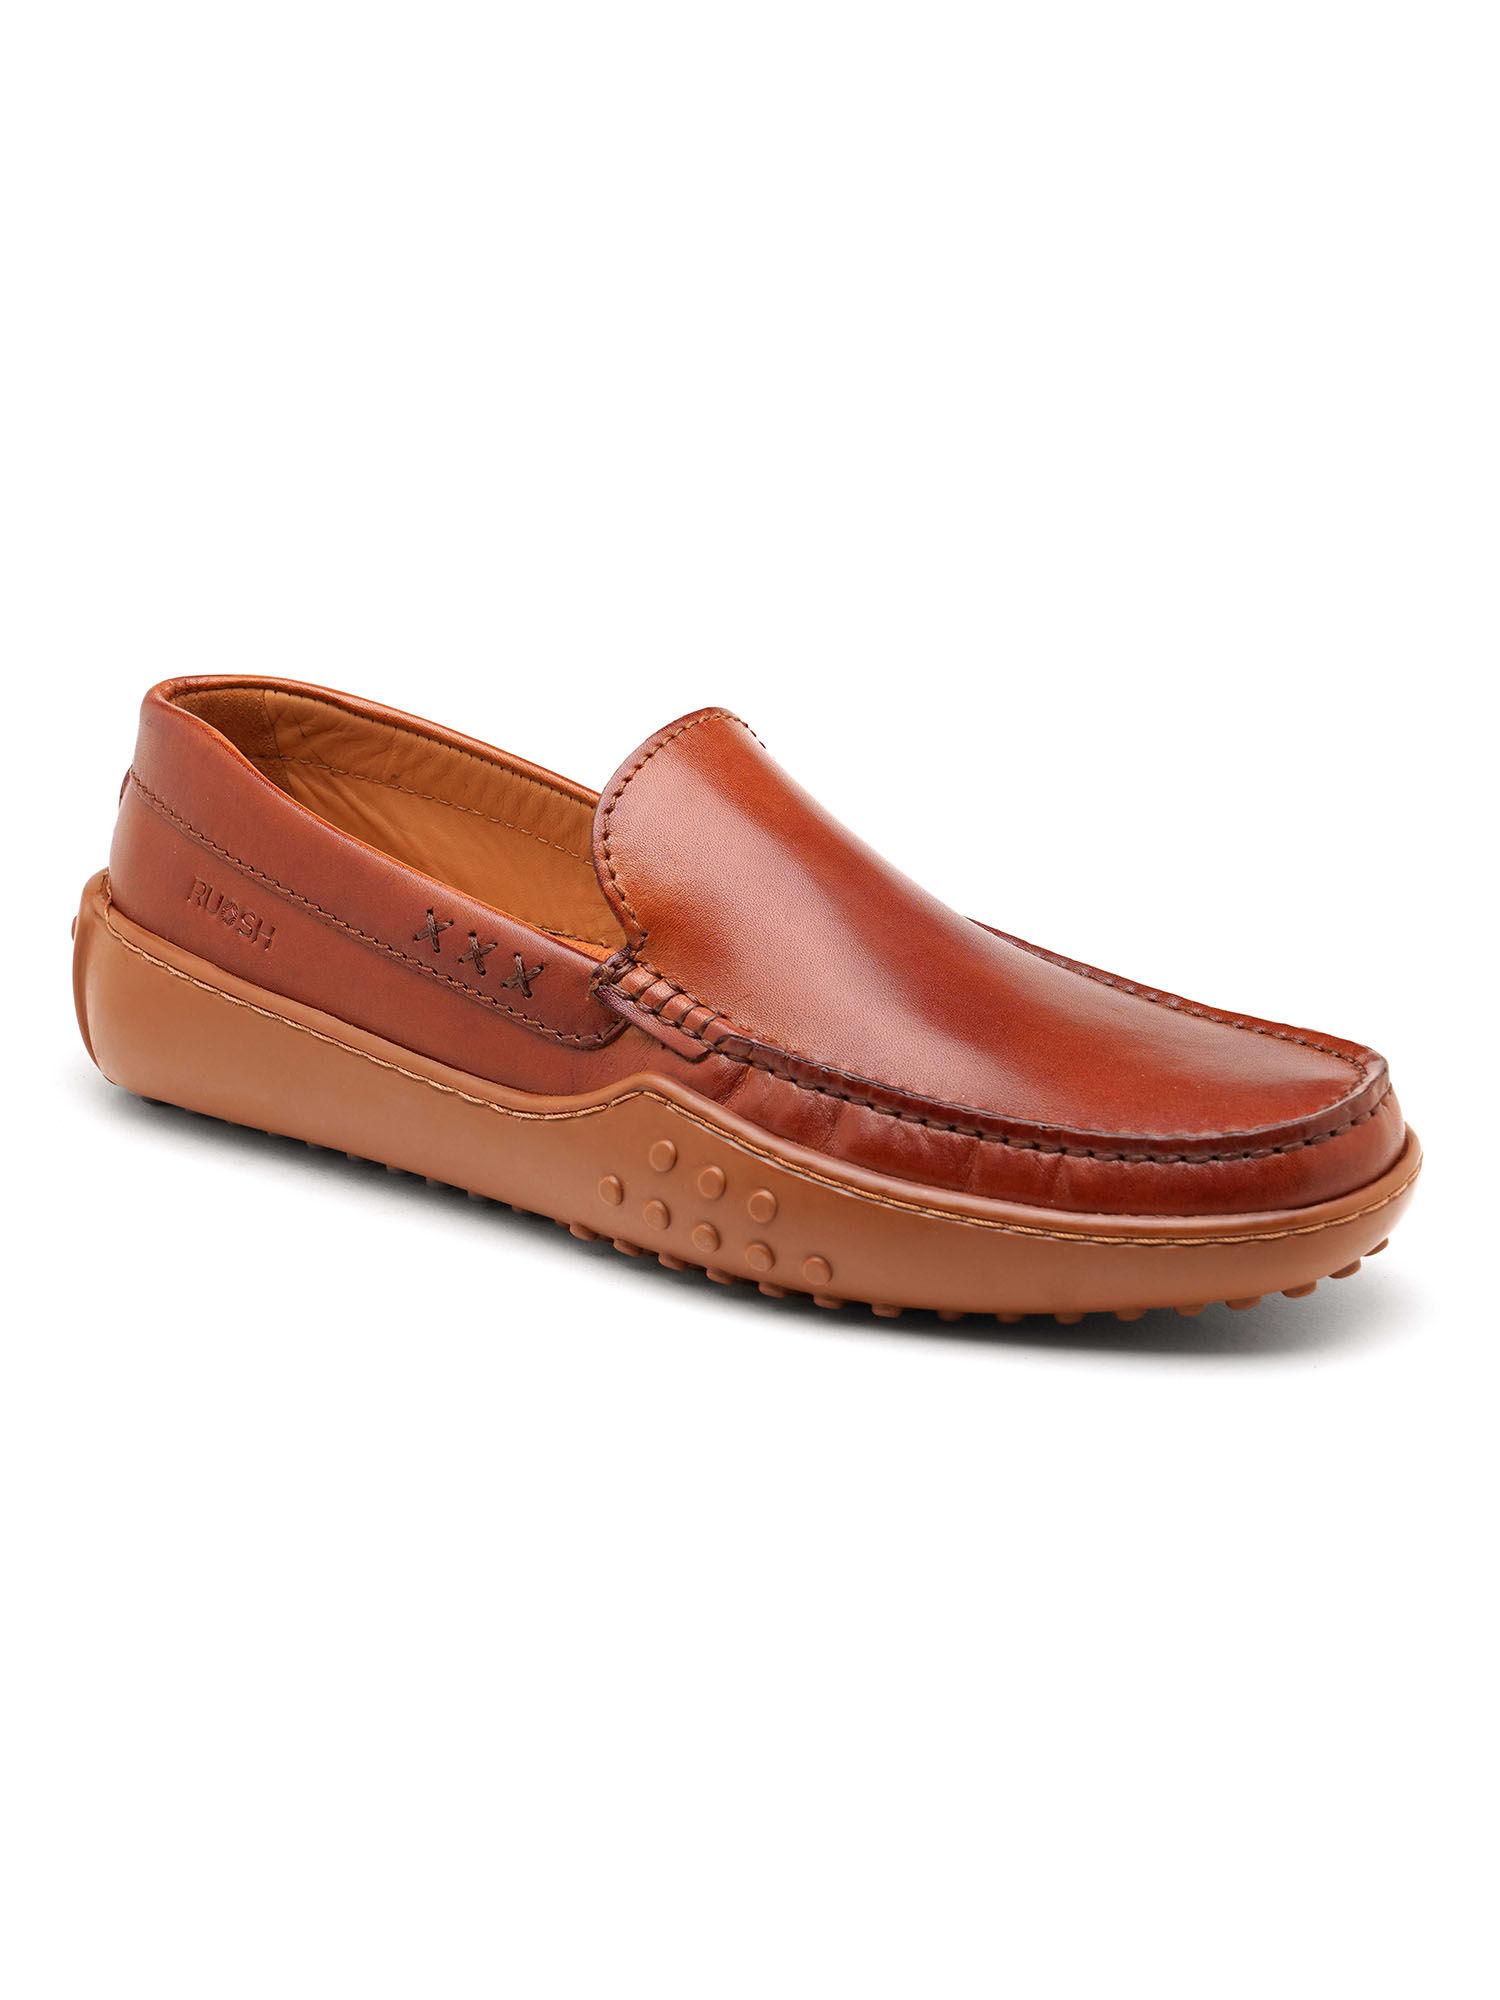 tan driver casual loafers for men